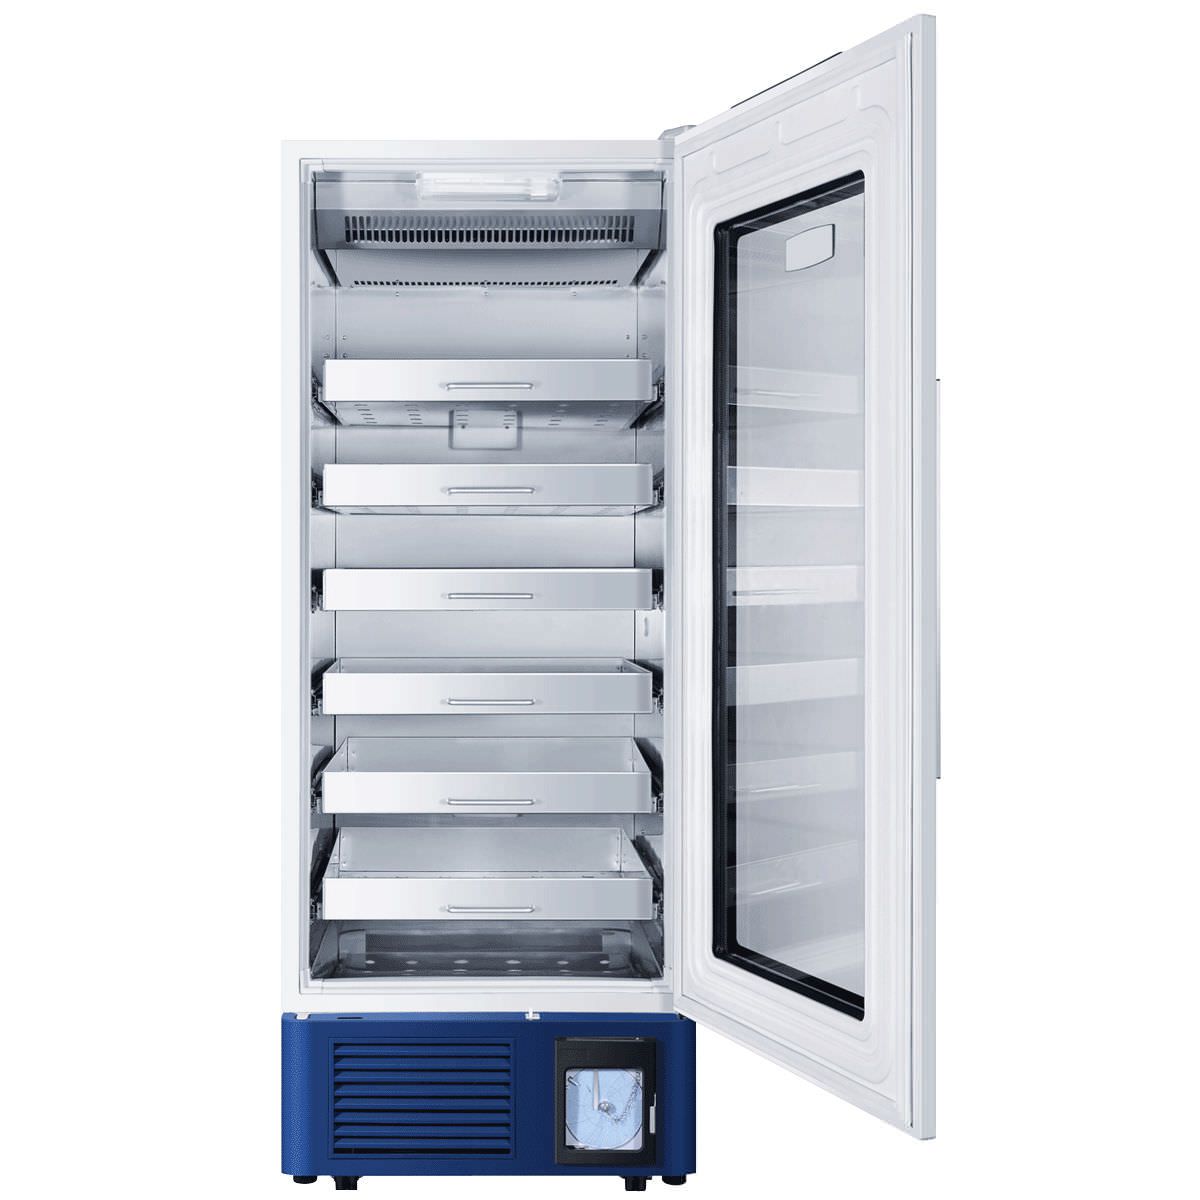 Refrigerator 4 °C , 608 L | HXC-608B Haier Medical and Laboratory Products